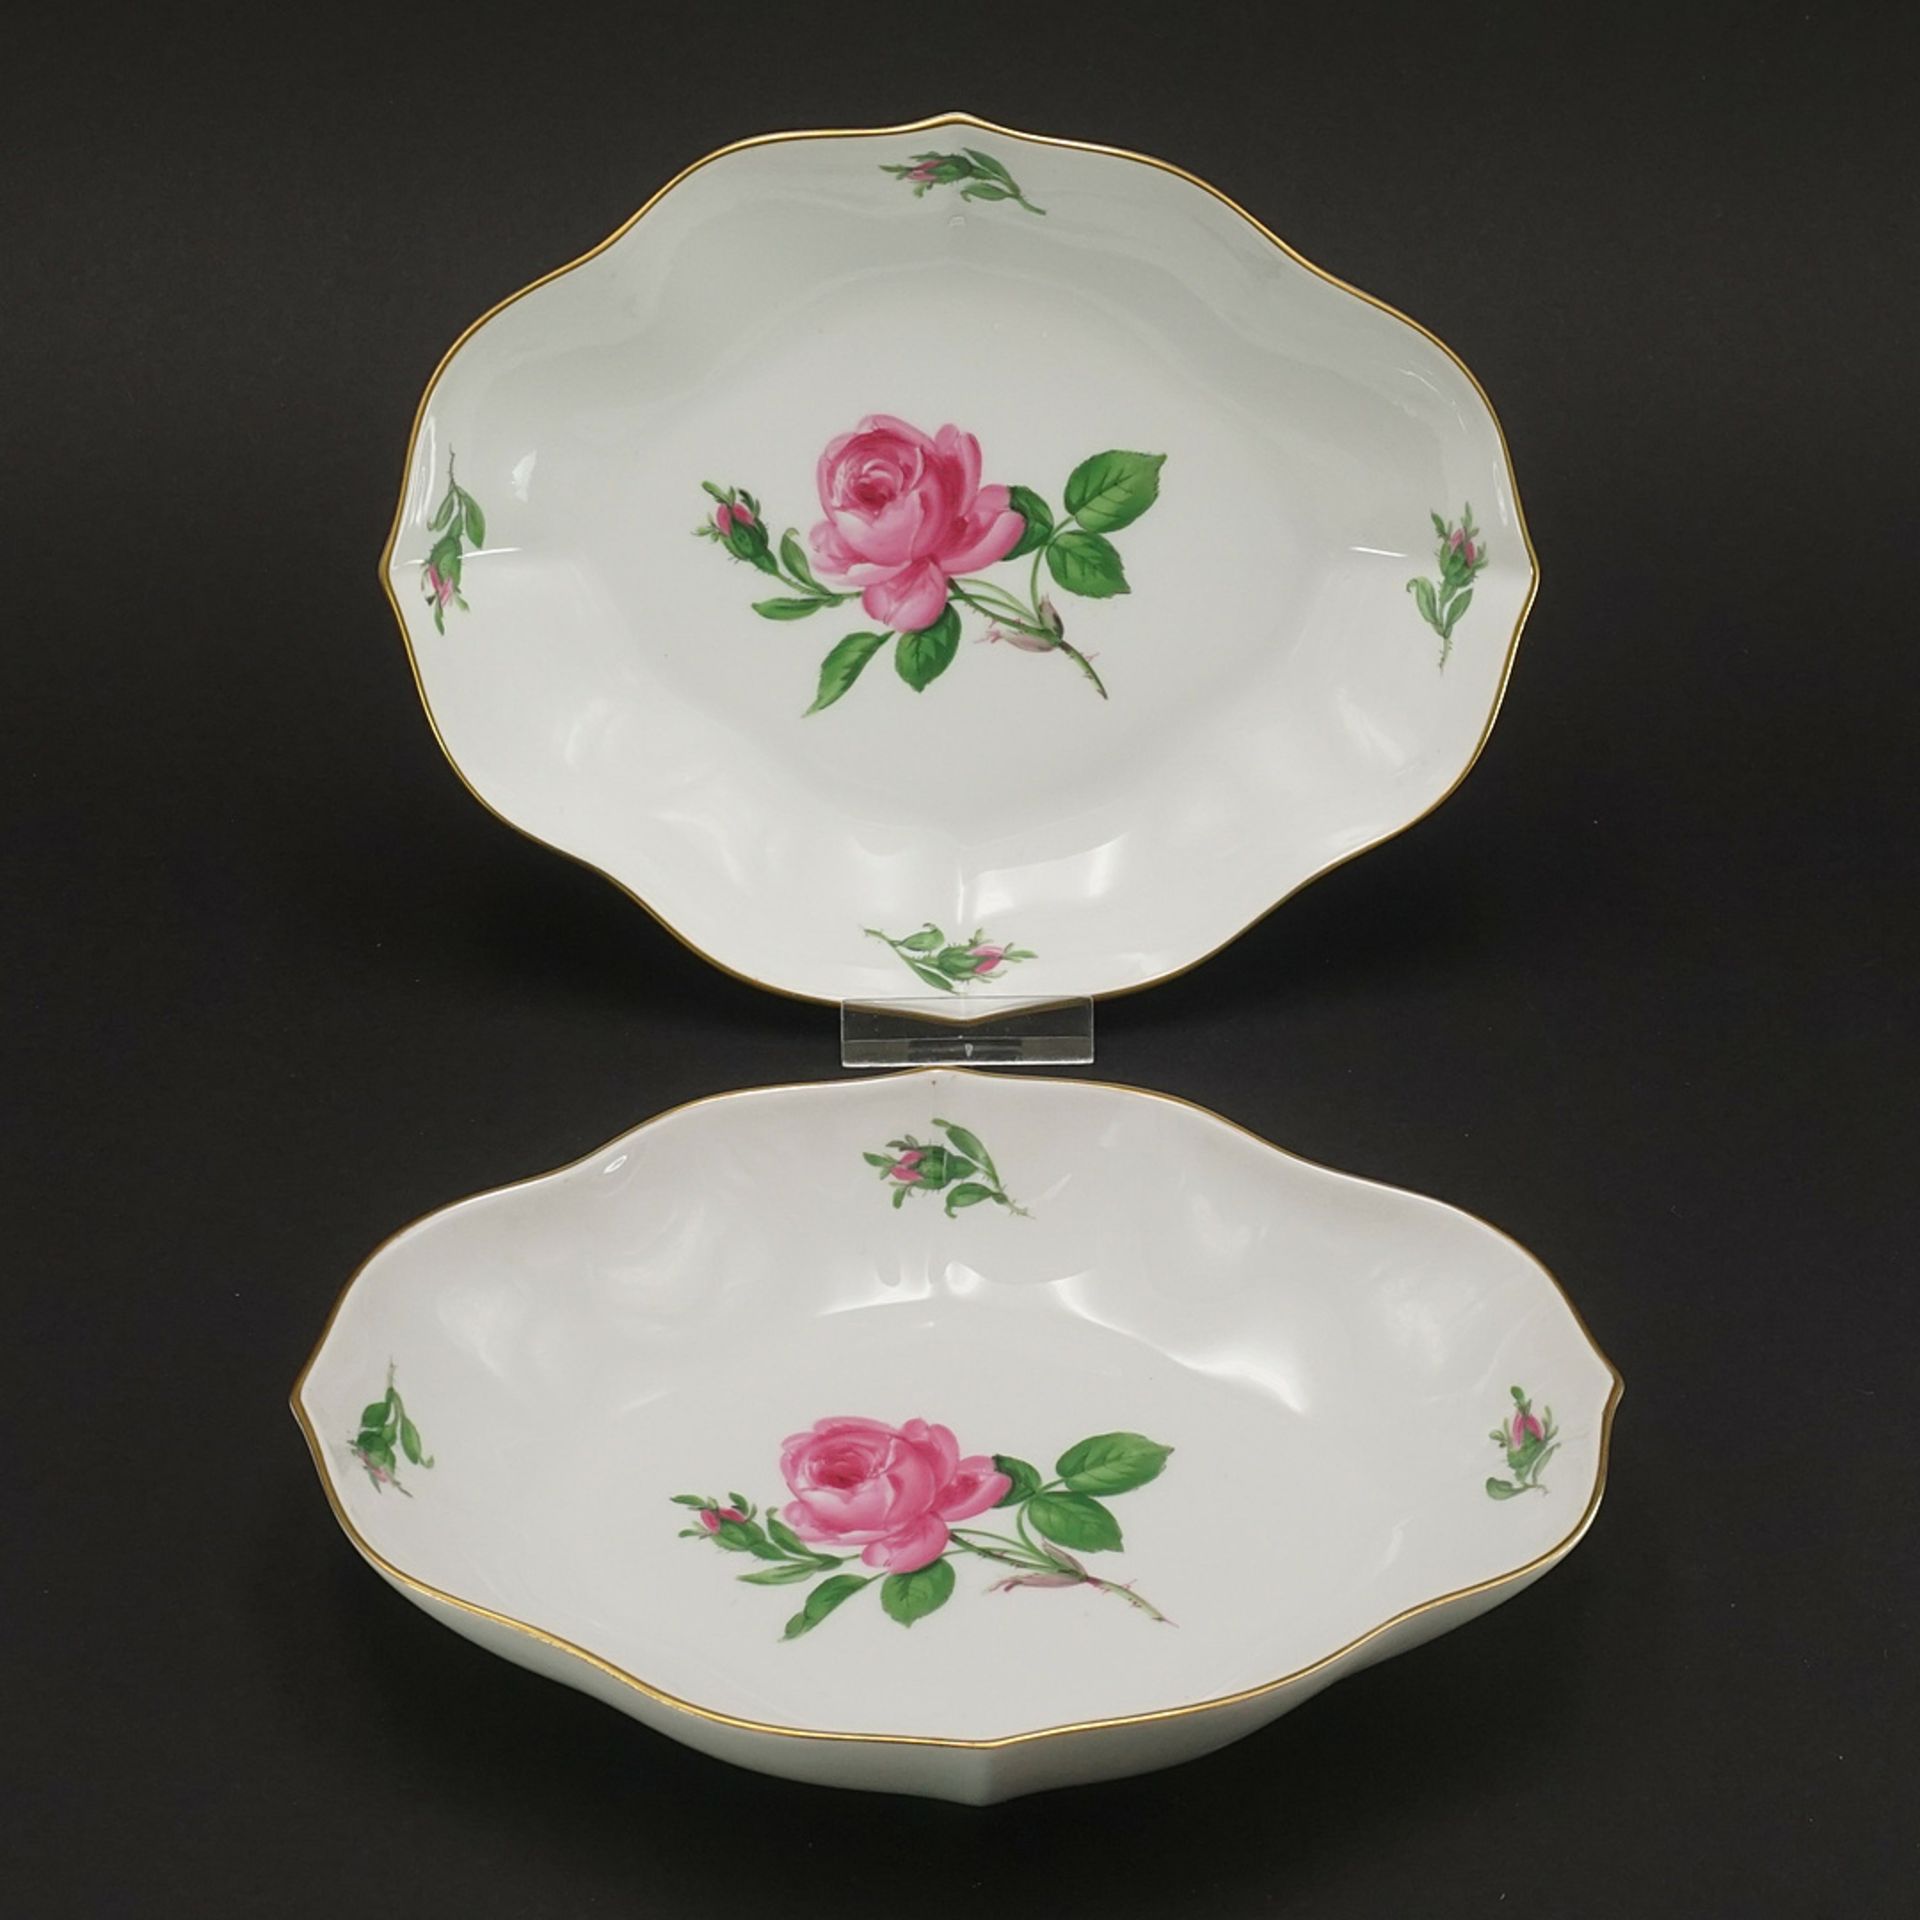 Two Meissen bowls with red rose